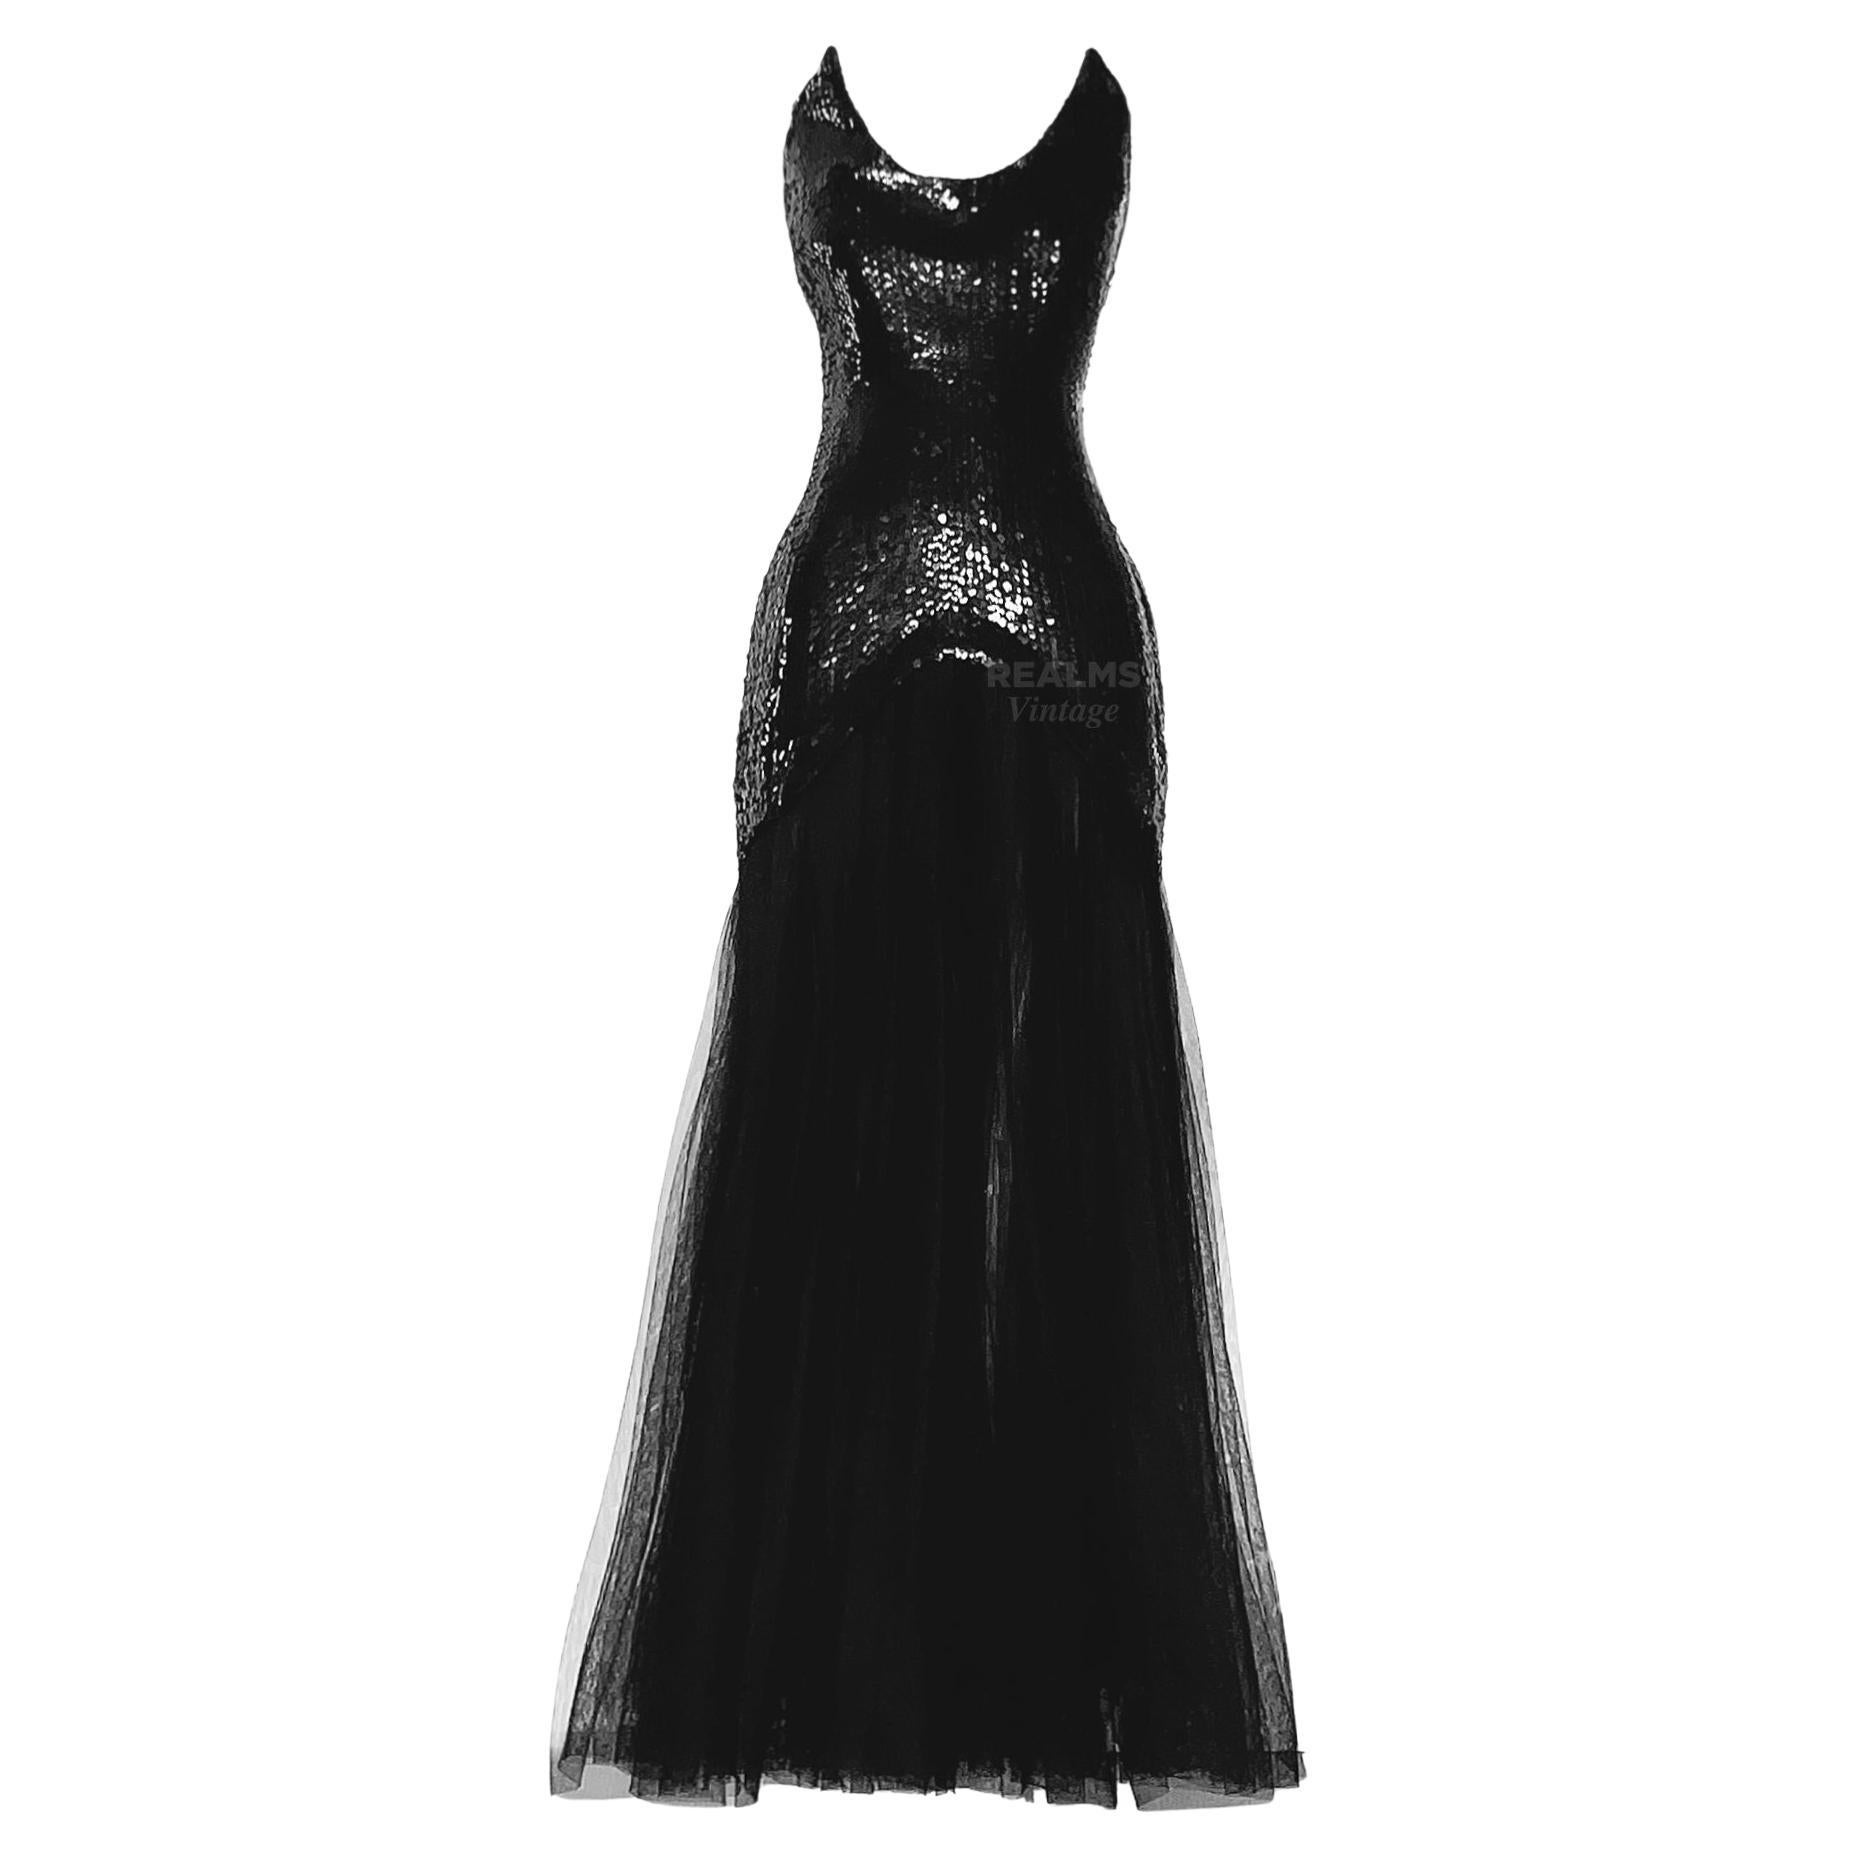 Showstopper Thierry Mugler Dramatic Evening Gown Black Sequin For Sale